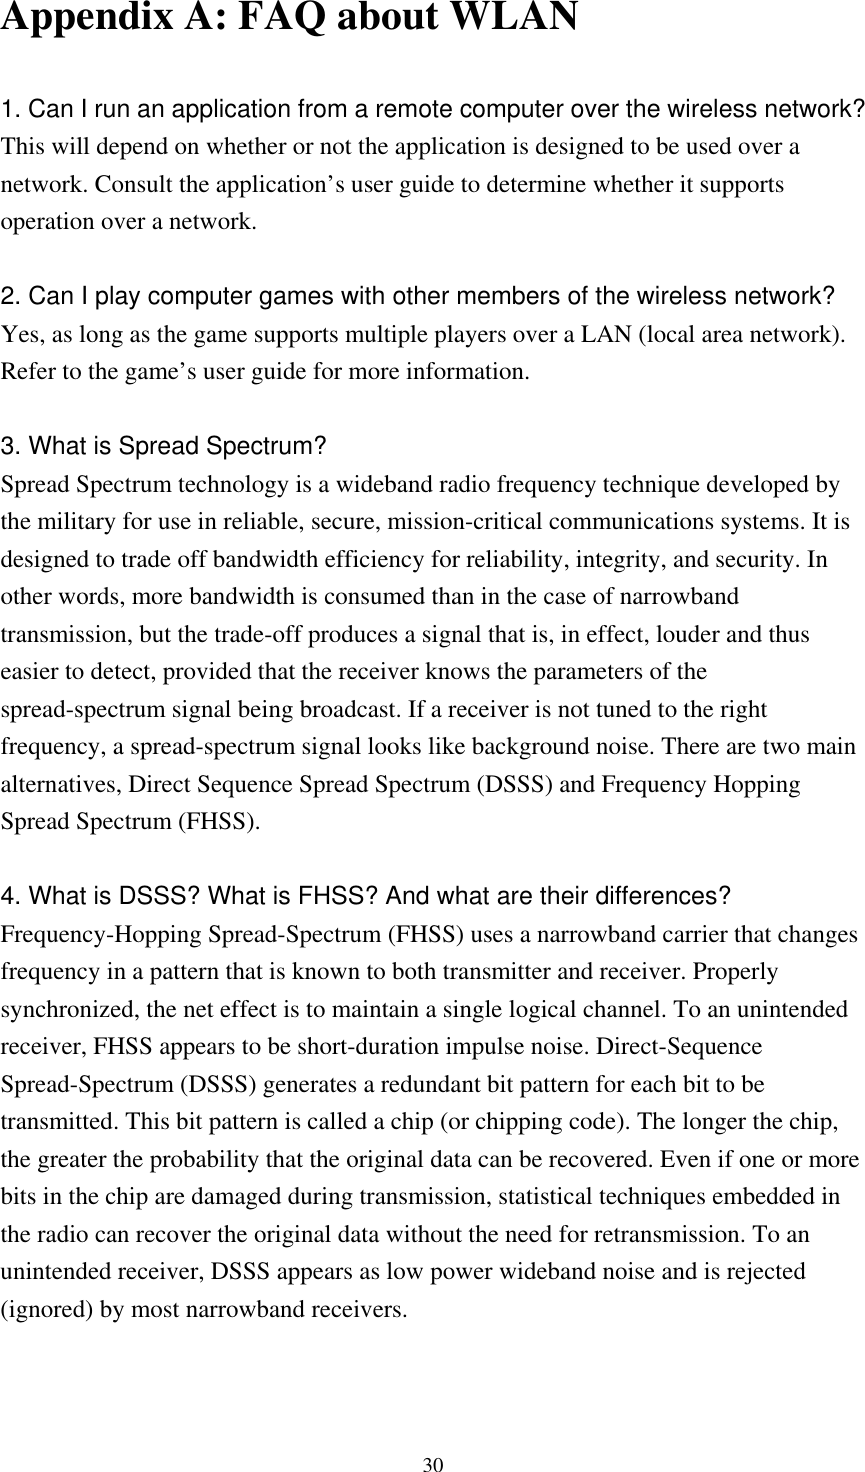  30Appendix A: FAQ about WLAN  1. Can I run an application from a remote computer over the wireless network? This will depend on whether or not the application is designed to be used over a network. Consult the application’s user guide to determine whether it supports operation over a network.  2. Can I play computer games with other members of the wireless network? Yes, as long as the game supports multiple players over a LAN (local area network). Refer to the game’s user guide for more information.  3. What is Spread Spectrum? Spread Spectrum technology is a wideband radio frequency technique developed by the military for use in reliable, secure, mission-critical communications systems. It is designed to trade off bandwidth efficiency for reliability, integrity, and security. In other words, more bandwidth is consumed than in the case of narrowband transmission, but the trade-off produces a signal that is, in effect, louder and thus easier to detect, provided that the receiver knows the parameters of the spread-spectrum signal being broadcast. If a receiver is not tuned to the right frequency, a spread-spectrum signal looks like background noise. There are two main alternatives, Direct Sequence Spread Spectrum (DSSS) and Frequency Hopping Spread Spectrum (FHSS).  4. What is DSSS? What is FHSS? And what are their differences? Frequency-Hopping Spread-Spectrum (FHSS) uses a narrowband carrier that changes frequency in a pattern that is known to both transmitter and receiver. Properly synchronized, the net effect is to maintain a single logical channel. To an unintended receiver, FHSS appears to be short-duration impulse noise. Direct-Sequence Spread-Spectrum (DSSS) generates a redundant bit pattern for each bit to be transmitted. This bit pattern is called a chip (or chipping code). The longer the chip, the greater the probability that the original data can be recovered. Even if one or more bits in the chip are damaged during transmission, statistical techniques embedded in the radio can recover the original data without the need for retransmission. To an unintended receiver, DSSS appears as low power wideband noise and is rejected (ignored) by most narrowband receivers.  